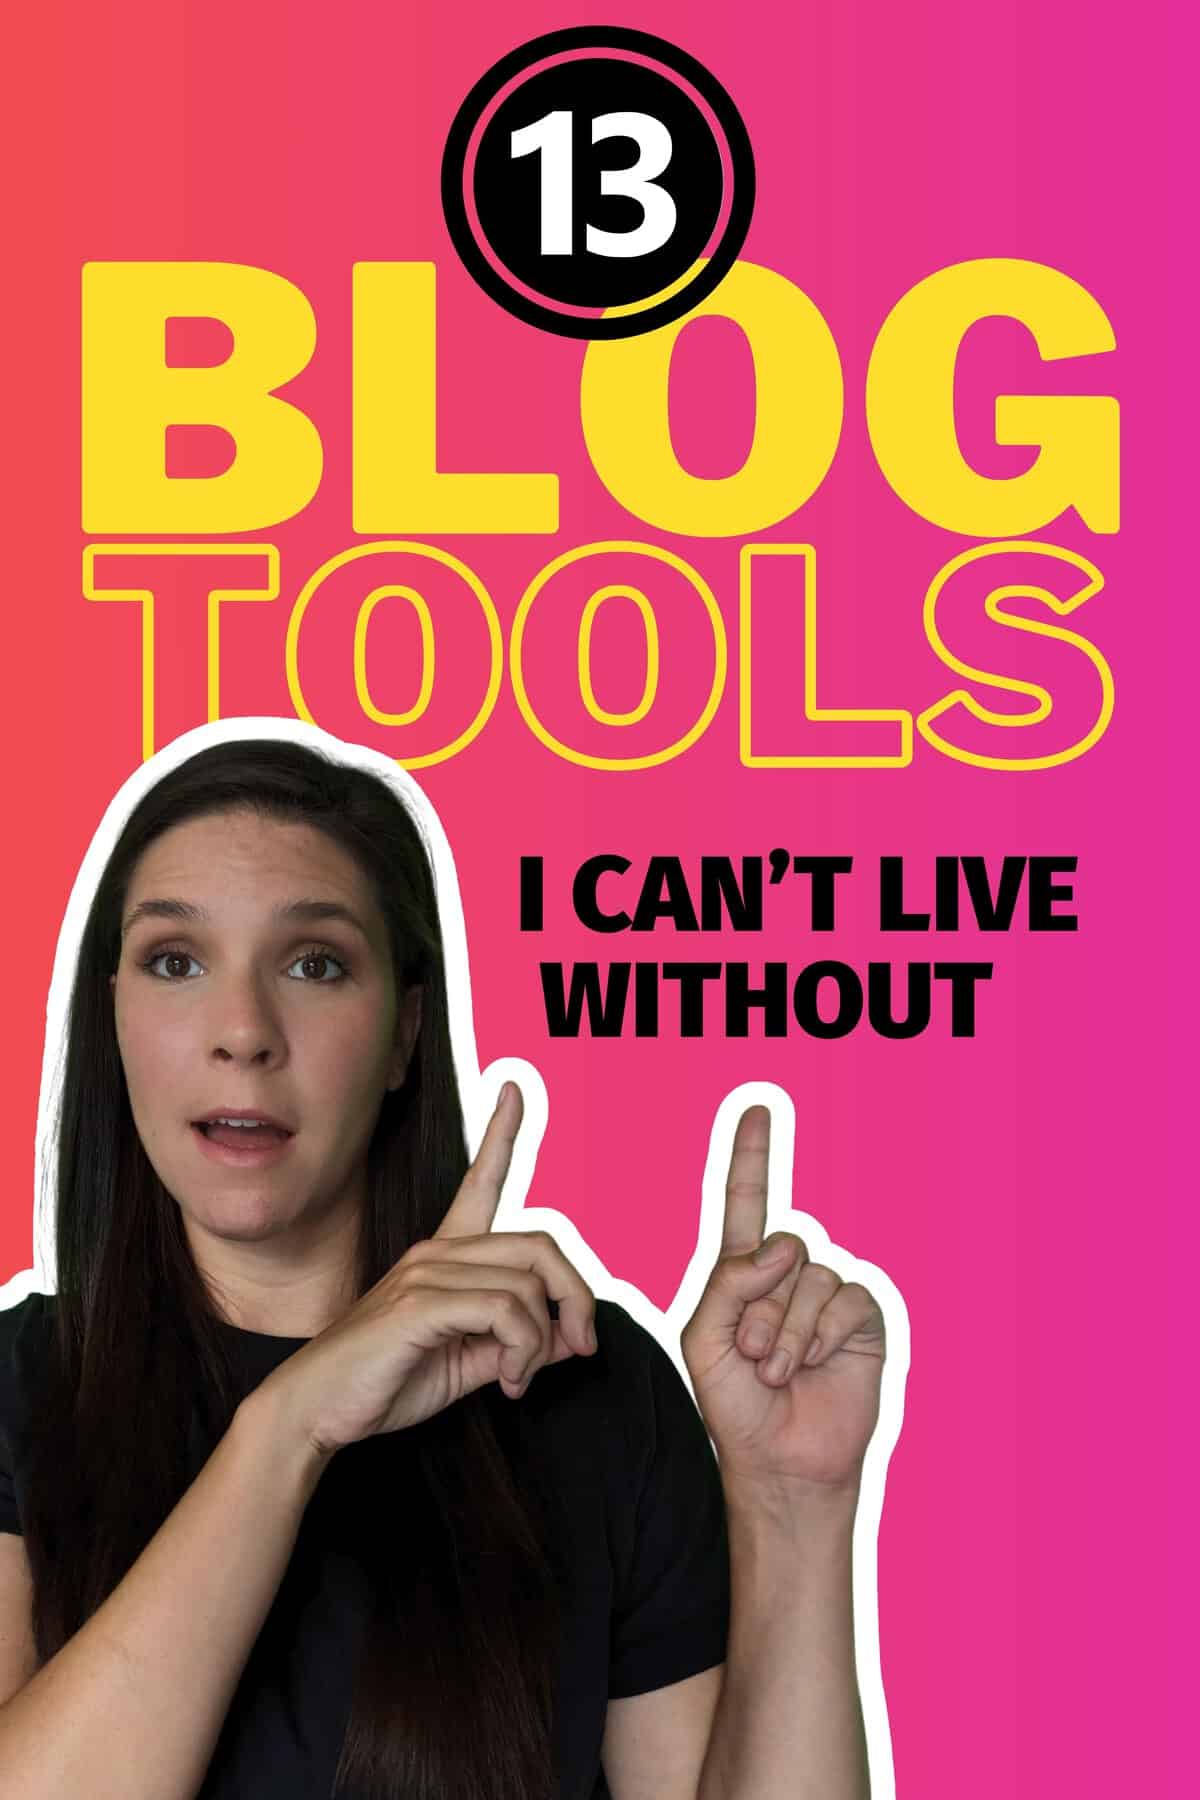 Woman excitedly pointing to: 13 blog tools I can't live without